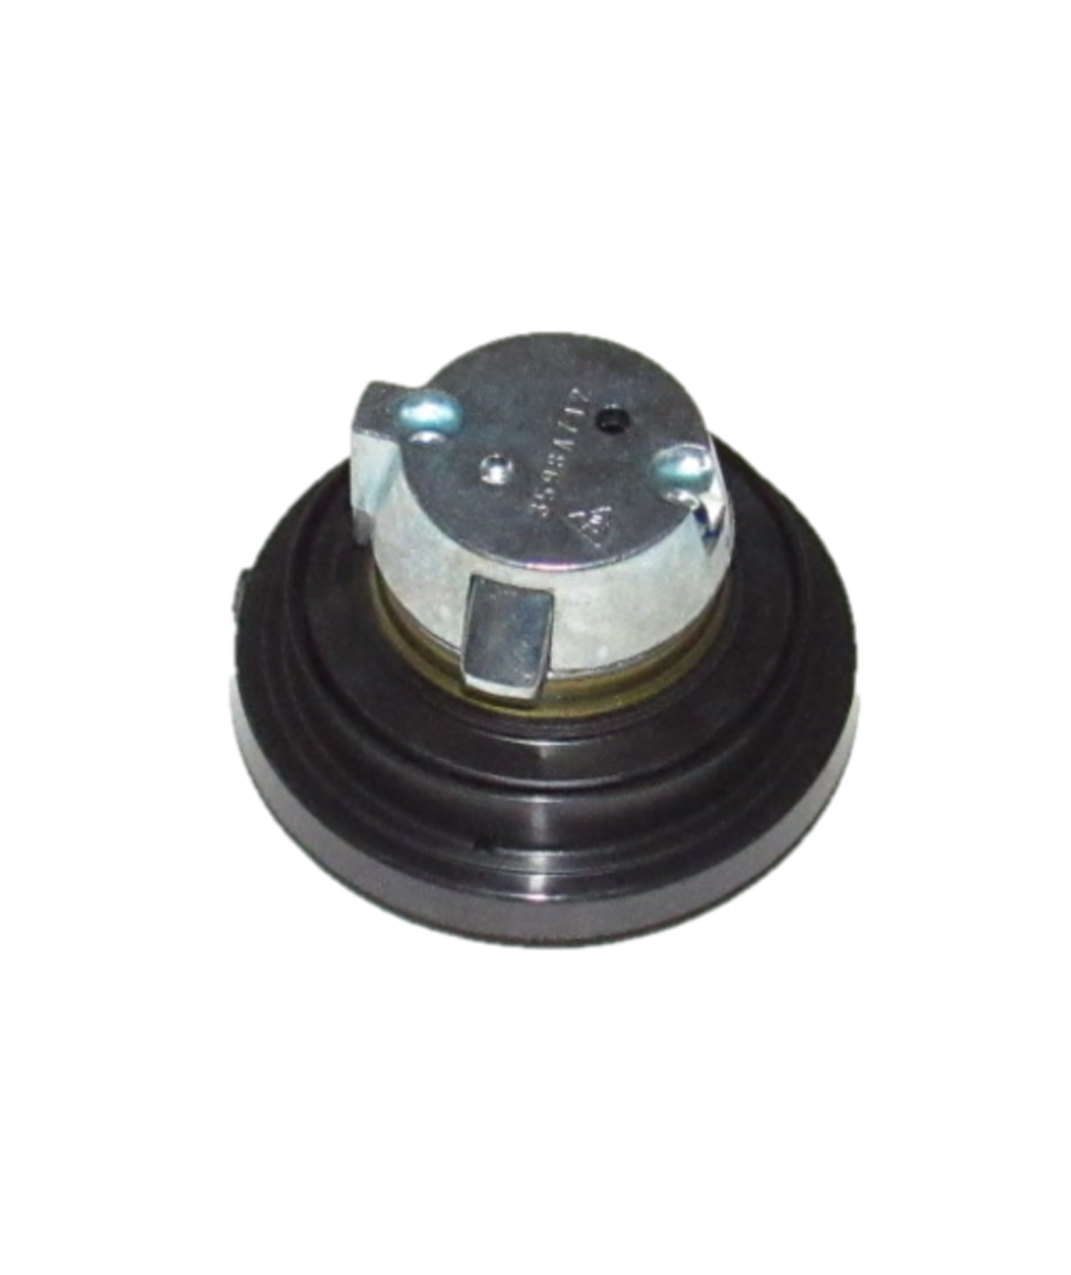 UNIVERSAL LOCKING GAS CAP Fits E-Ton Beamer 50, 150, & Matrix 50, 150 Scooters + many others Stem OD=41mm Depth=24mm - Click Image to Close